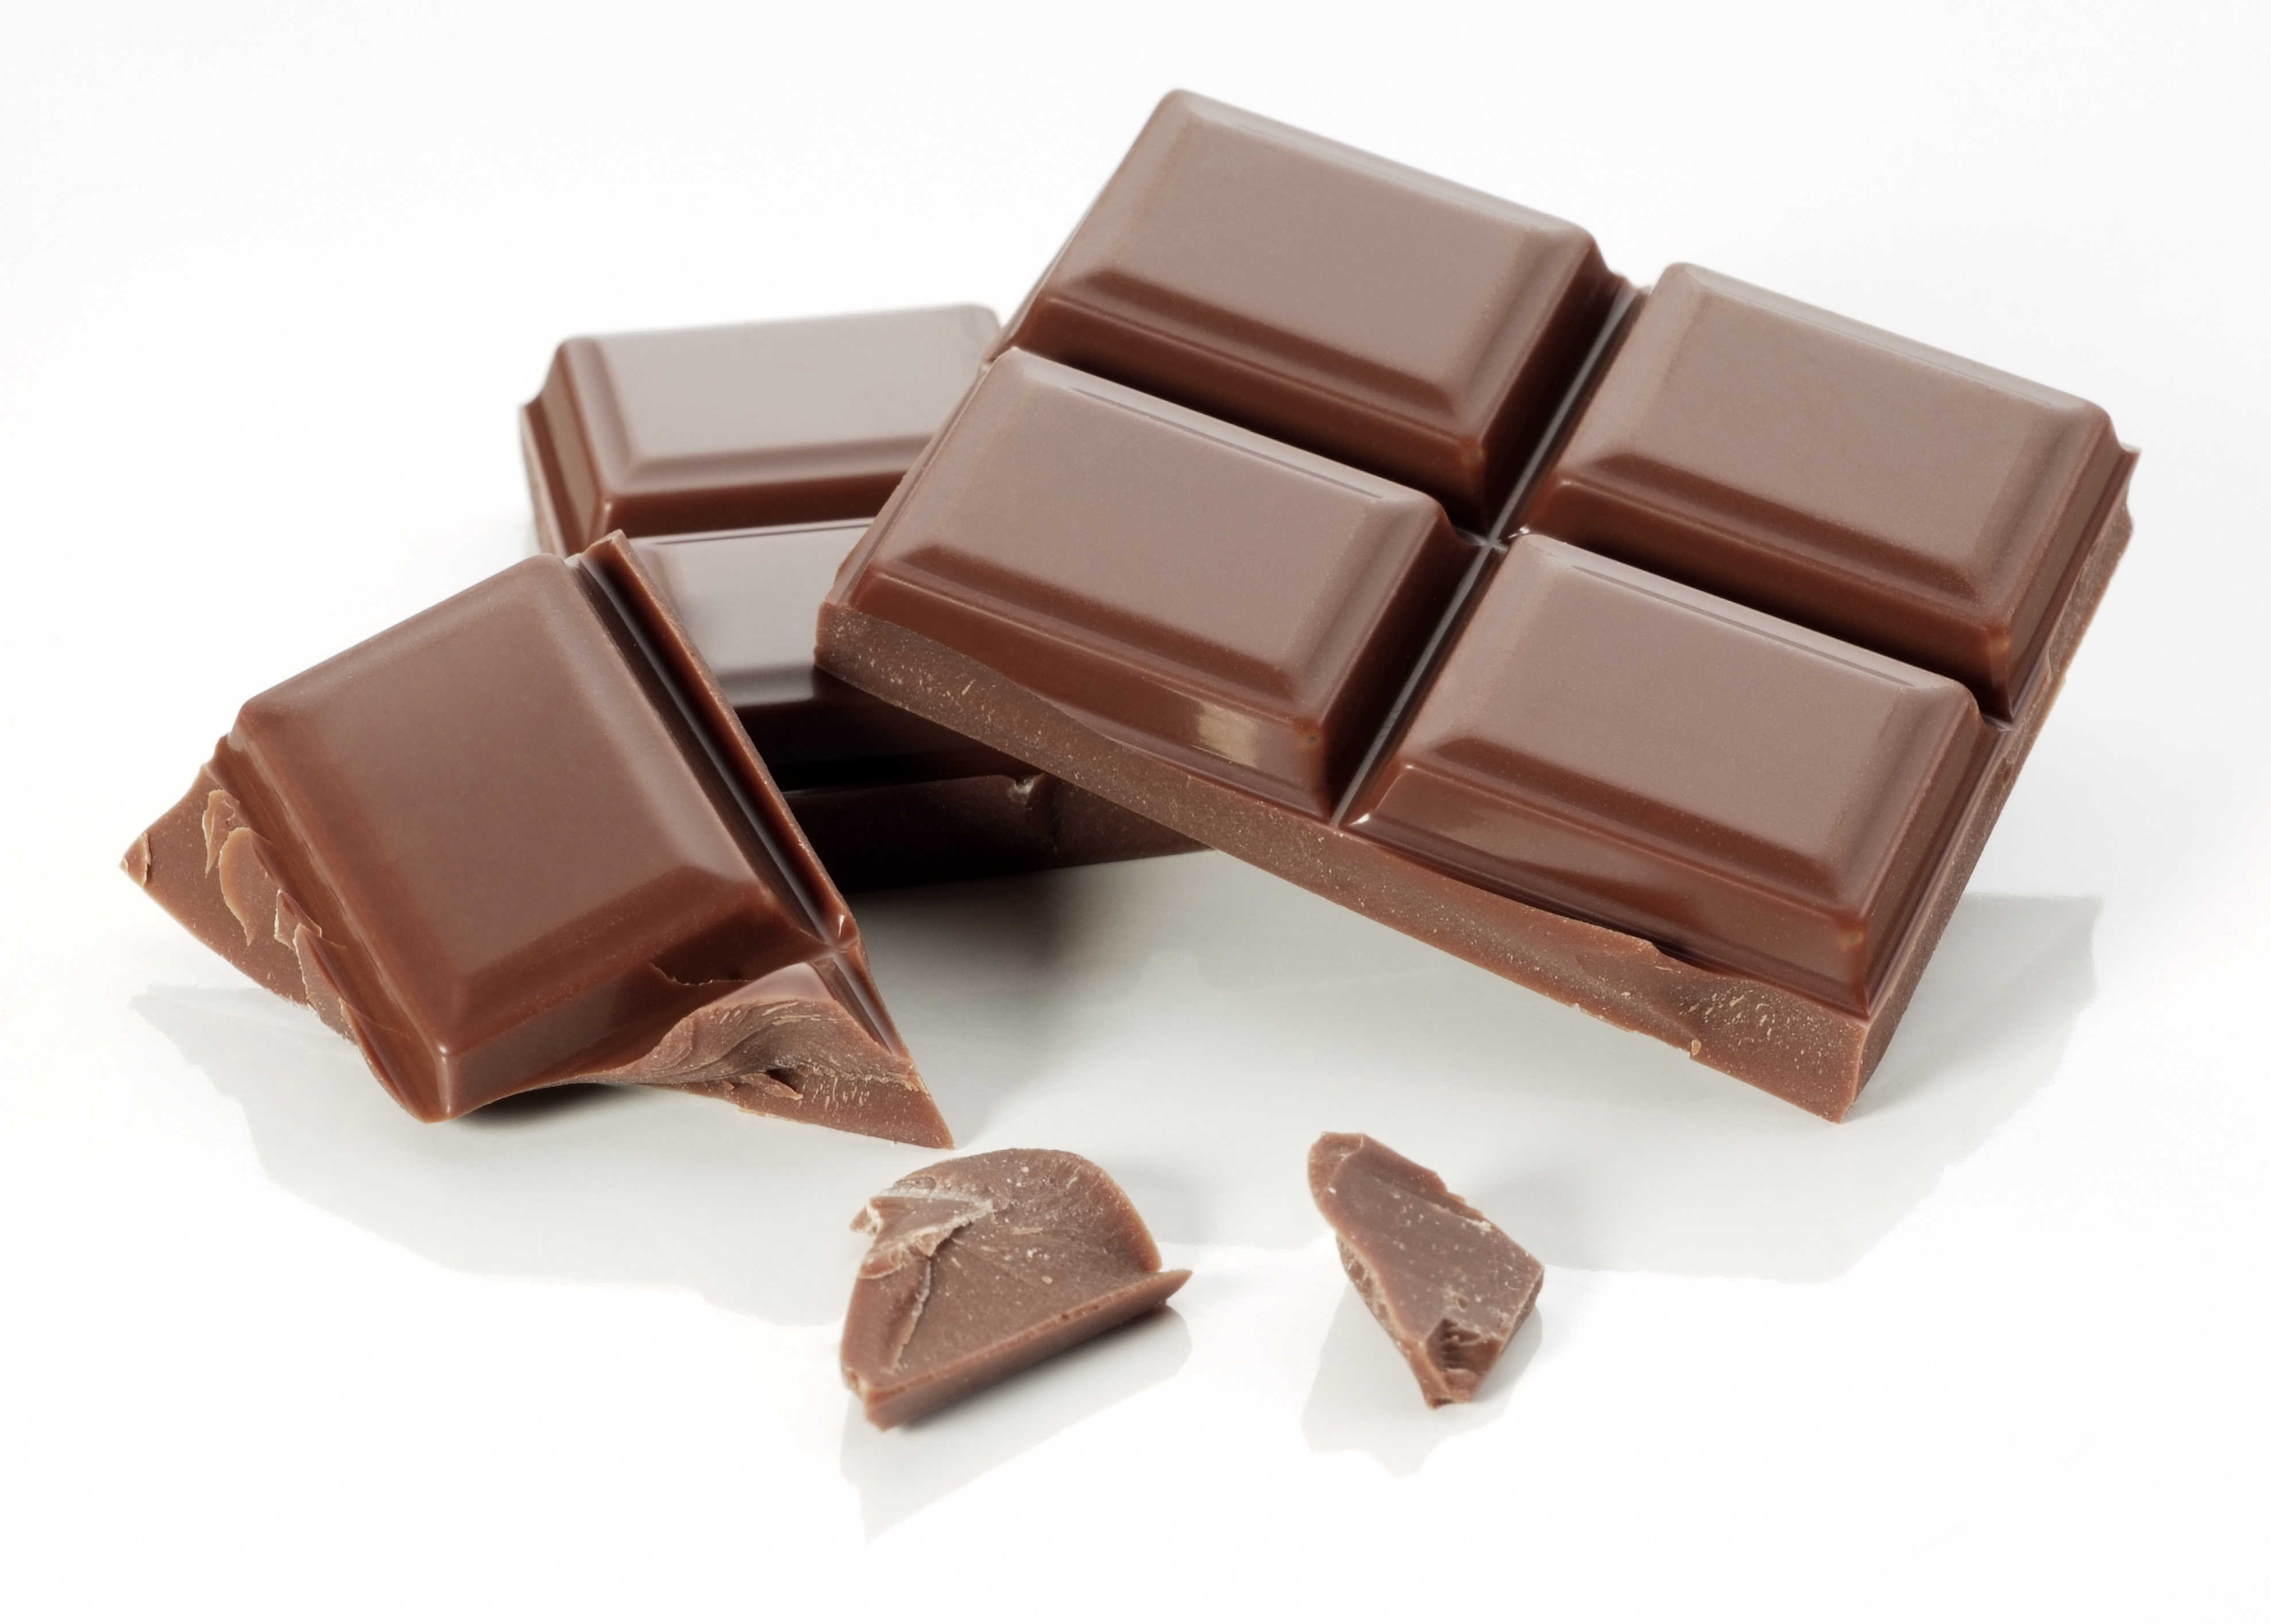 Scientists studied the mouth-feel of chocolate